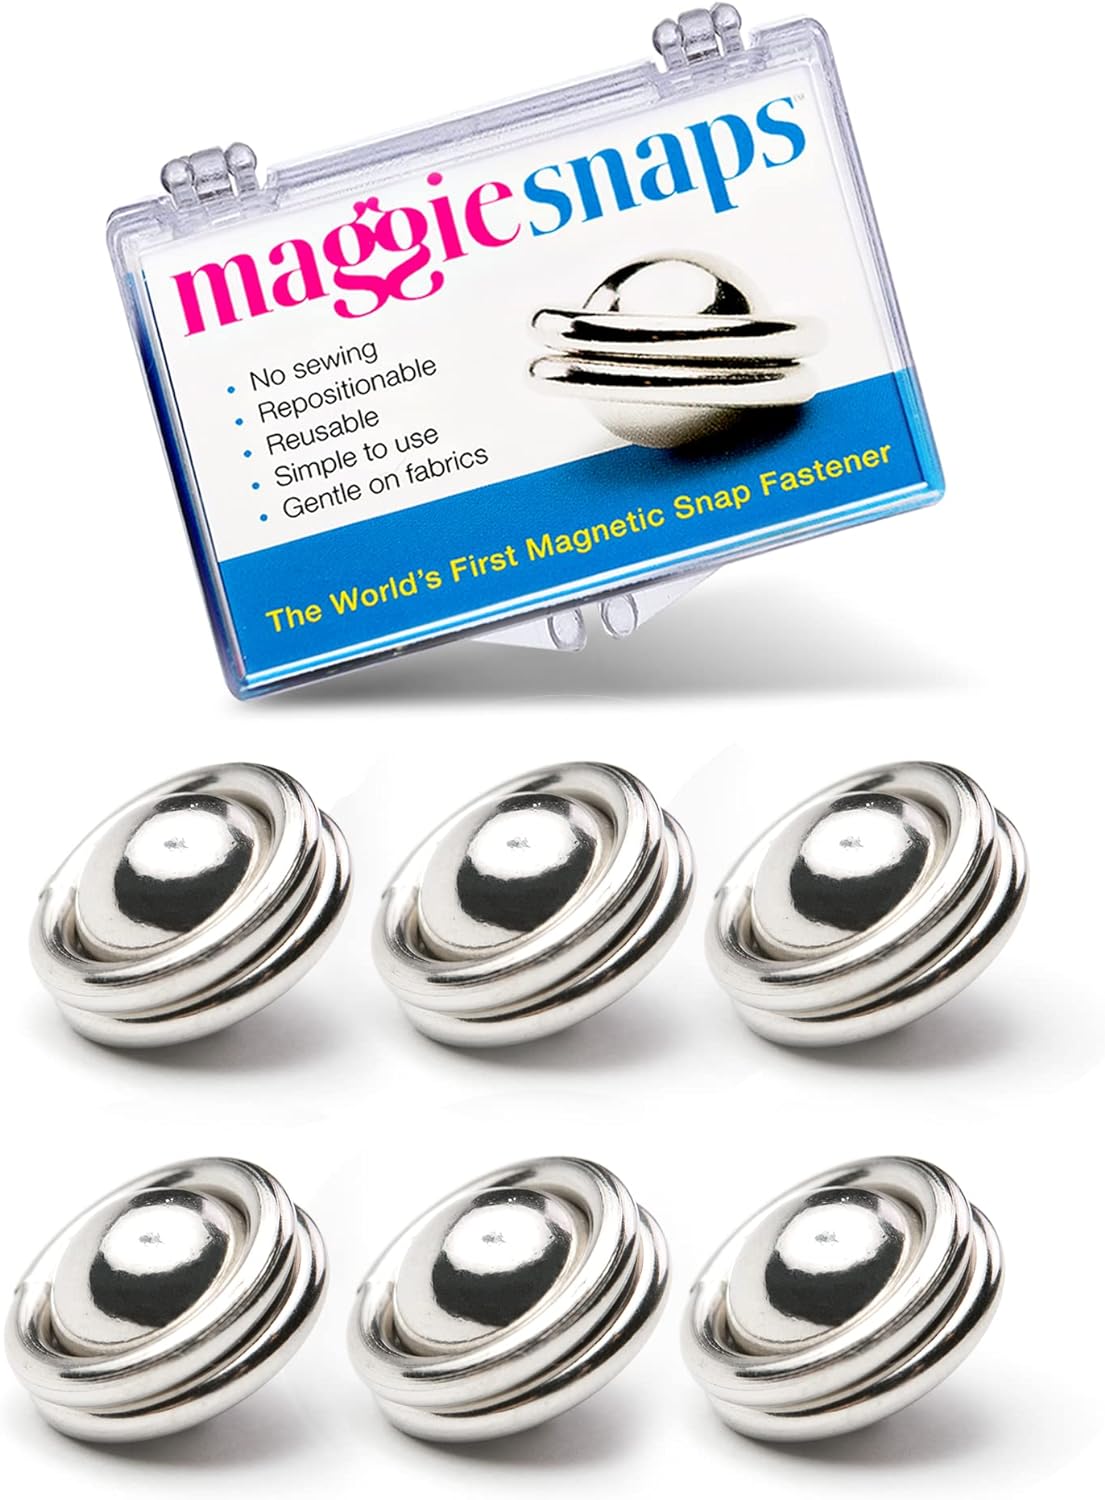 MAGGIE'S SNAPS - 6 PACK – MY MAGGIES